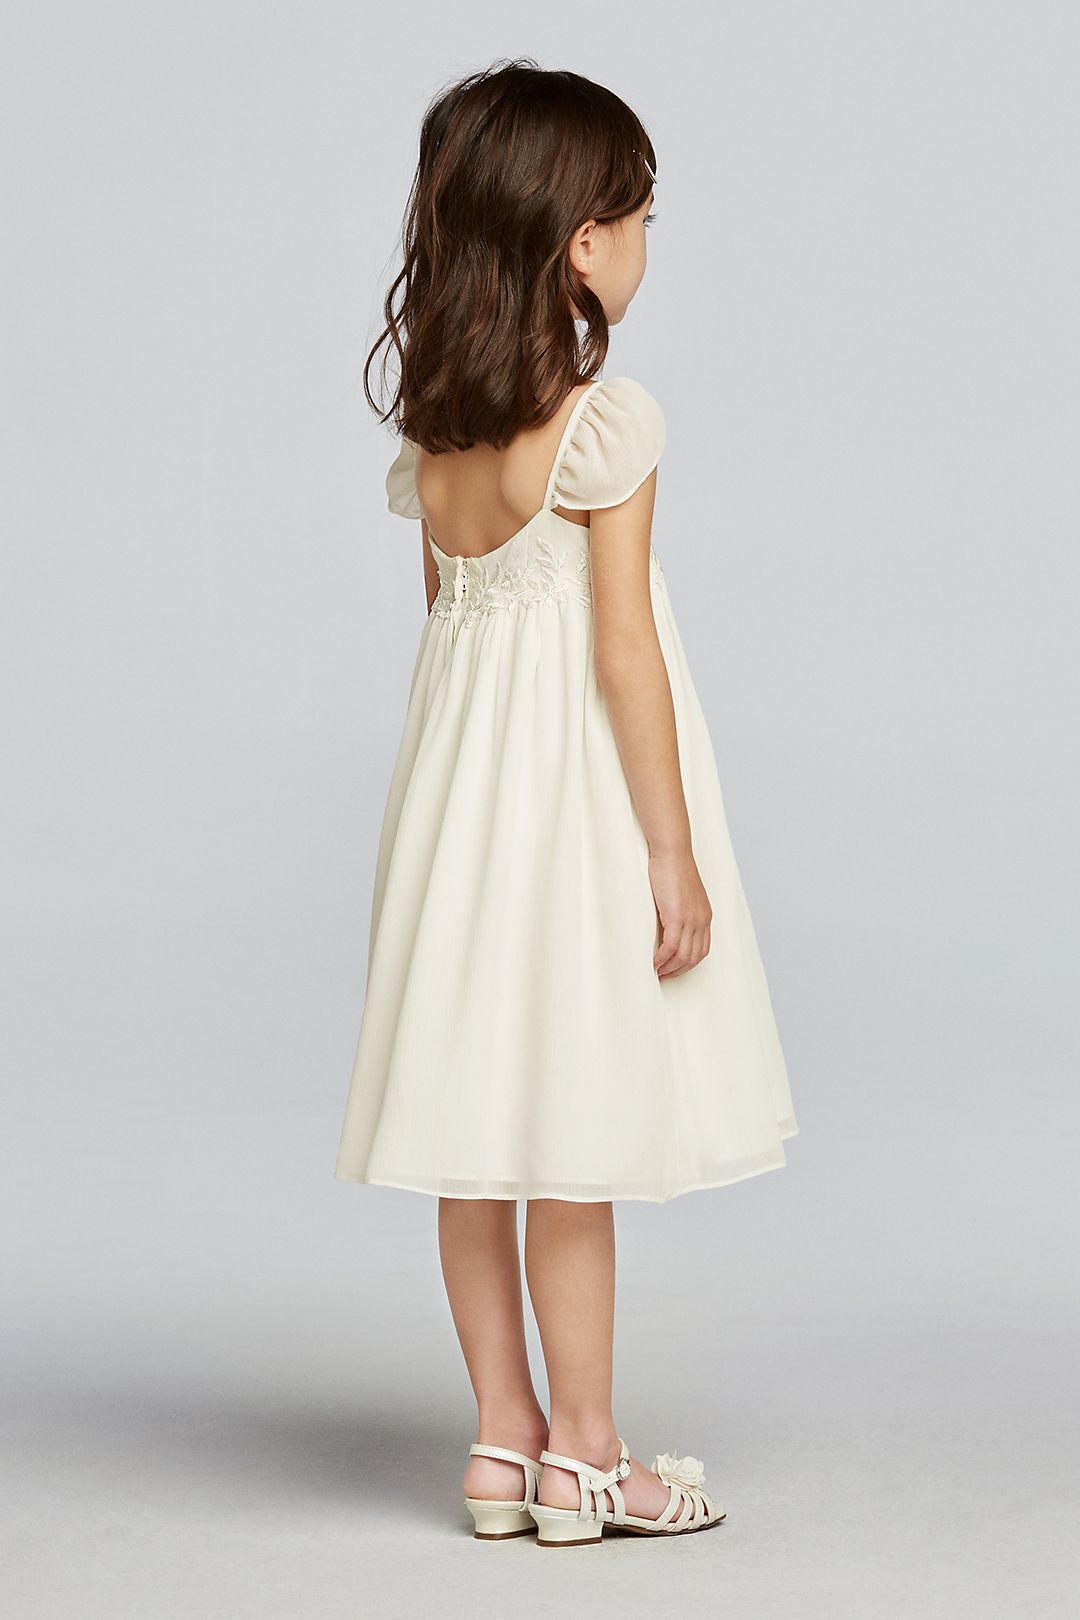 As-Is Chiffon Flower Girl Dress with Cap Sleeves Image 2